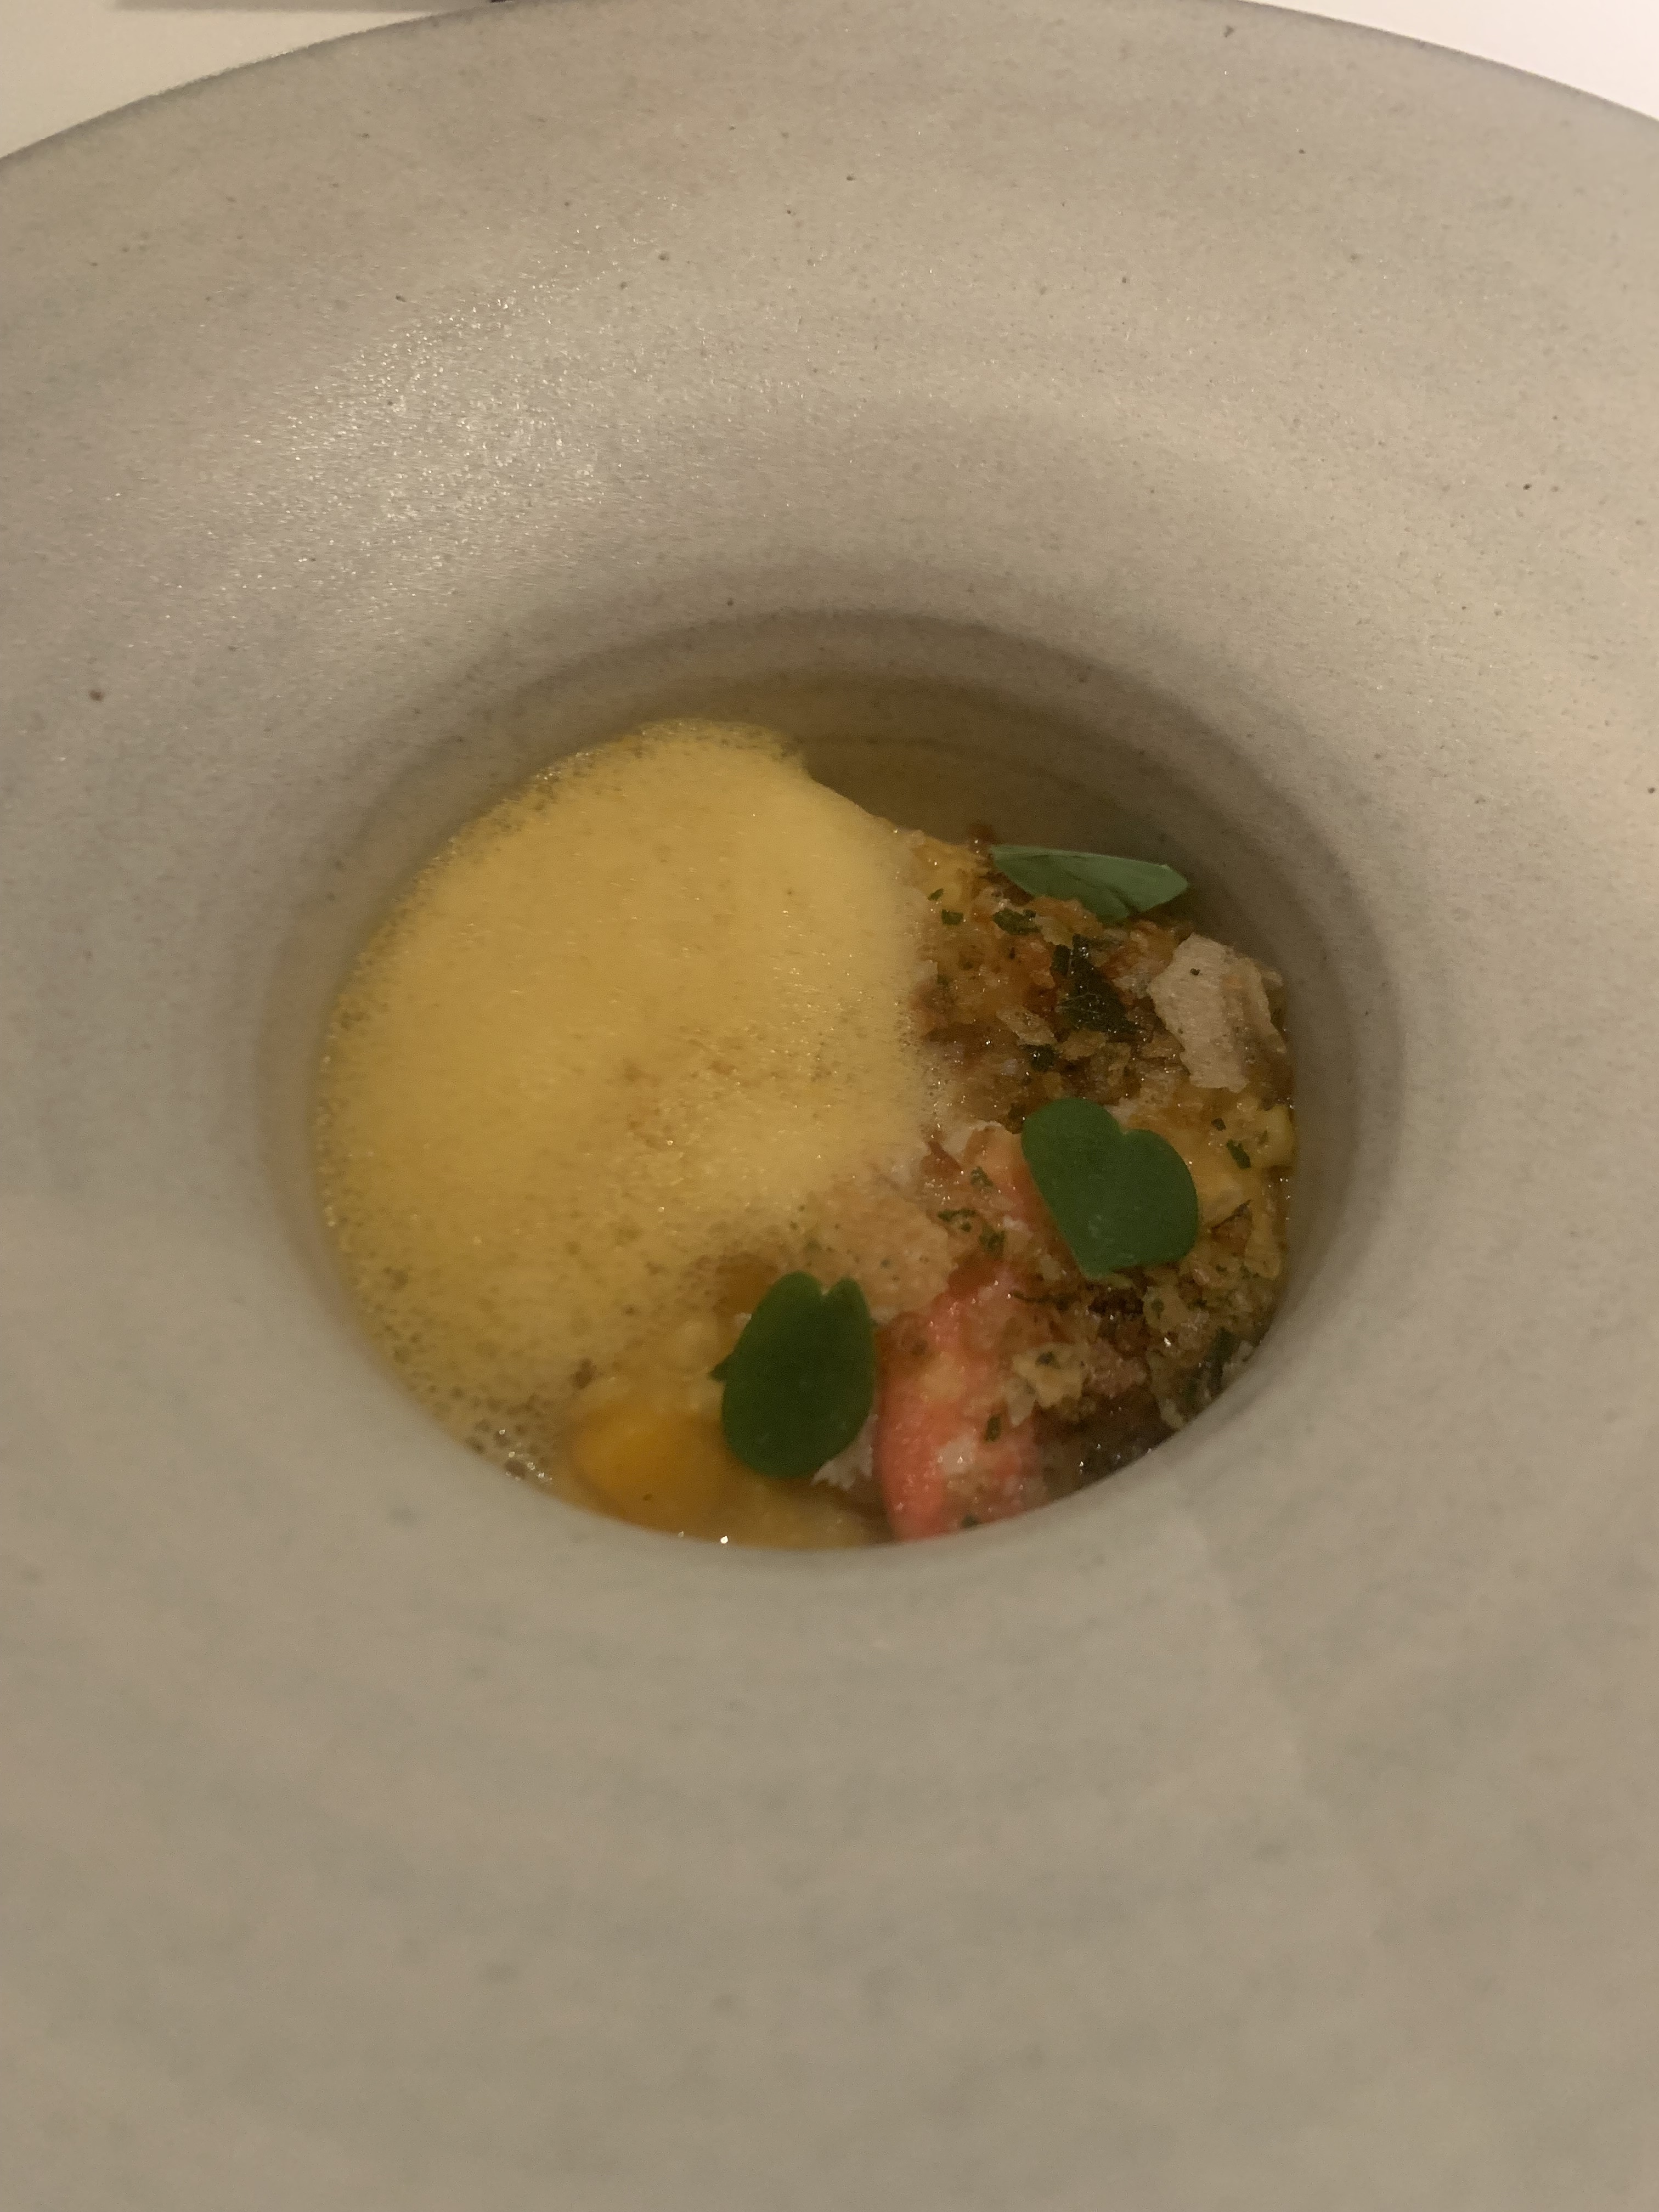 A small bowl with yellow foam covering most of the contents, with the pink & white flesh of crab barely peaking through, and some dark-brown crispy bits mixed in with the crab. A few small, dark-green leaves garnish the crab.